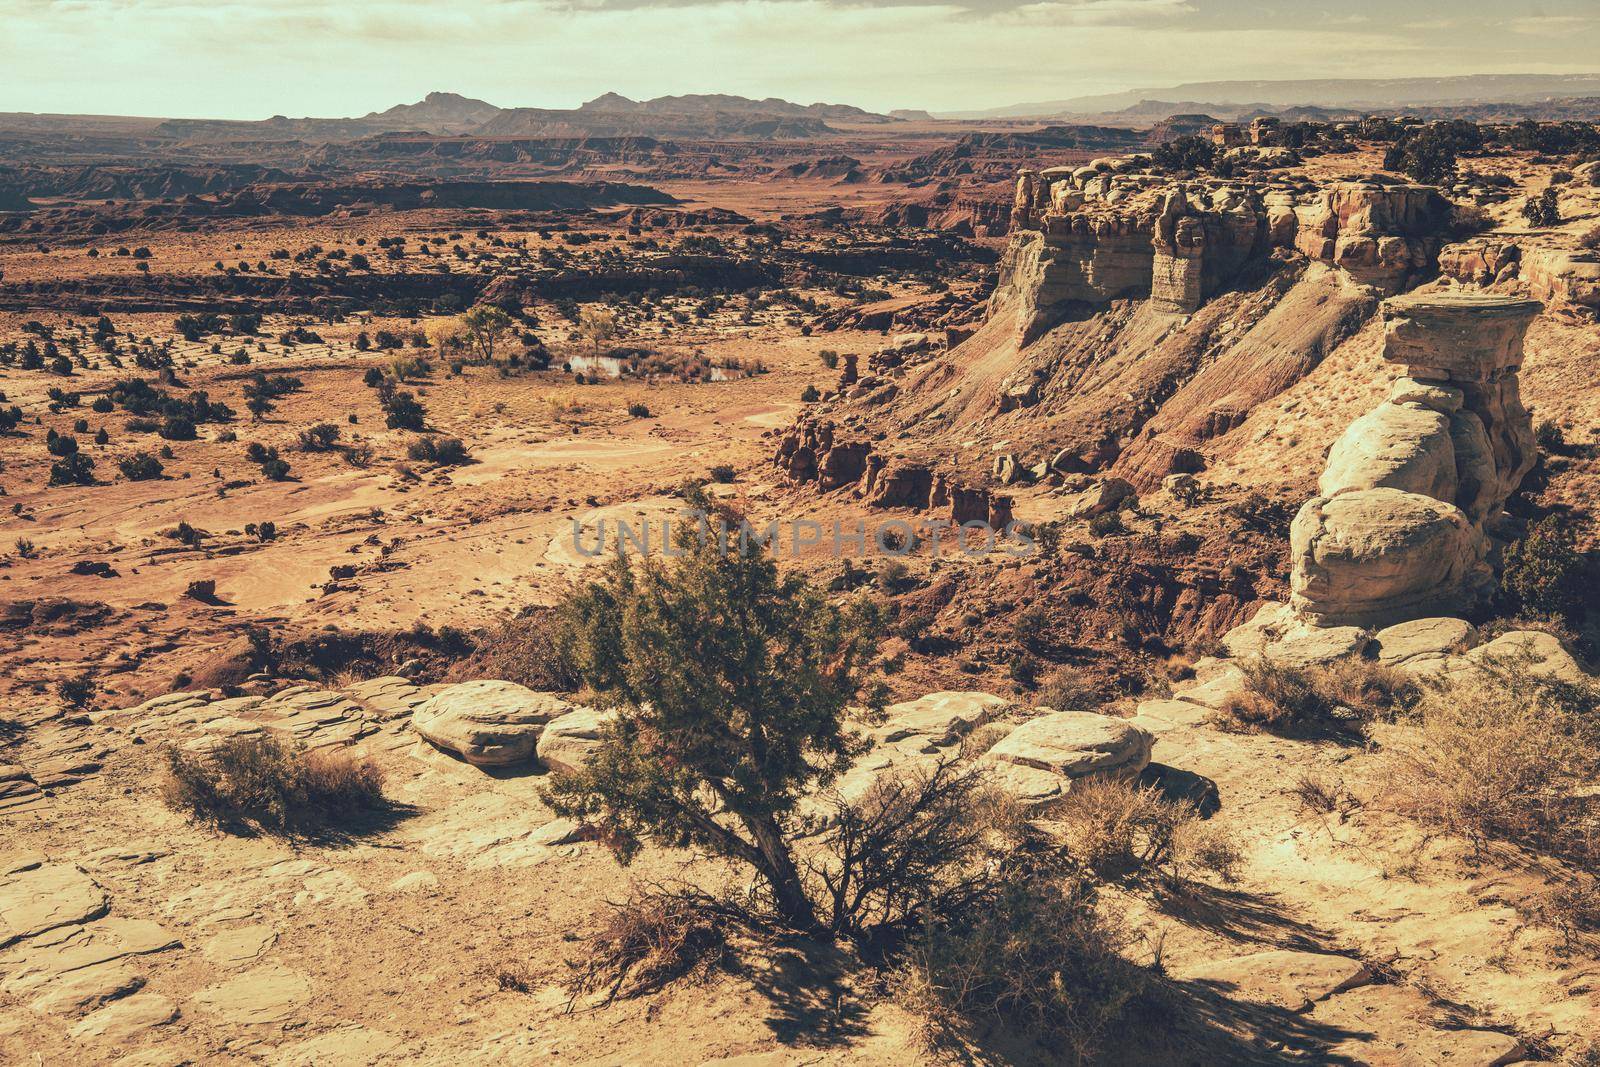 Raw Scenic Utah Rocky Landscape. Colourful Rock Formations. Nature Theme.